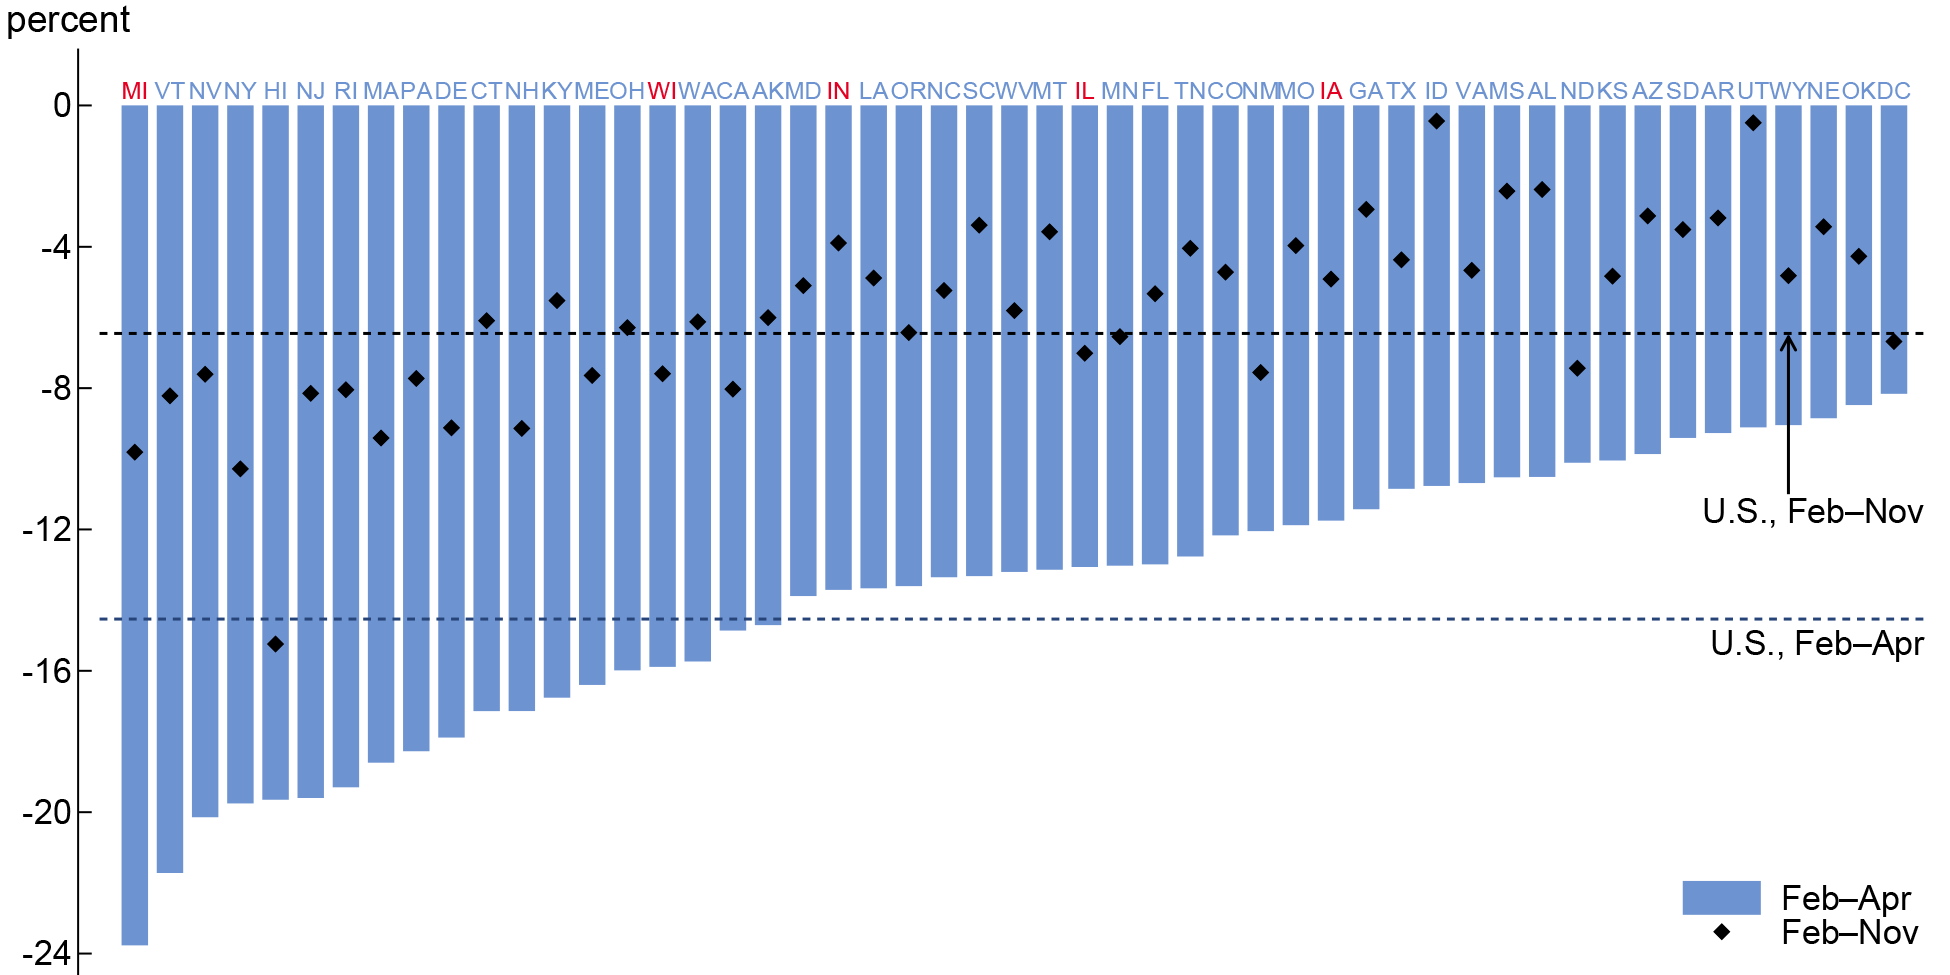 Figure 2 is a composite bar and scatter chart that plots the percent change in nonfarm payroll employment for each U.S. state and the District of Columbia from February through April 2020 (as blue bars) and February through November 2020 (as black diamonds). A dark blue dashed line, at –14.5%, indicates the percent change in nonfarm payroll employment for the U.S. as a whole between February and April 2020, and a black dashed line, at –6.5%, indicates this change for the nation between February and November 2020.